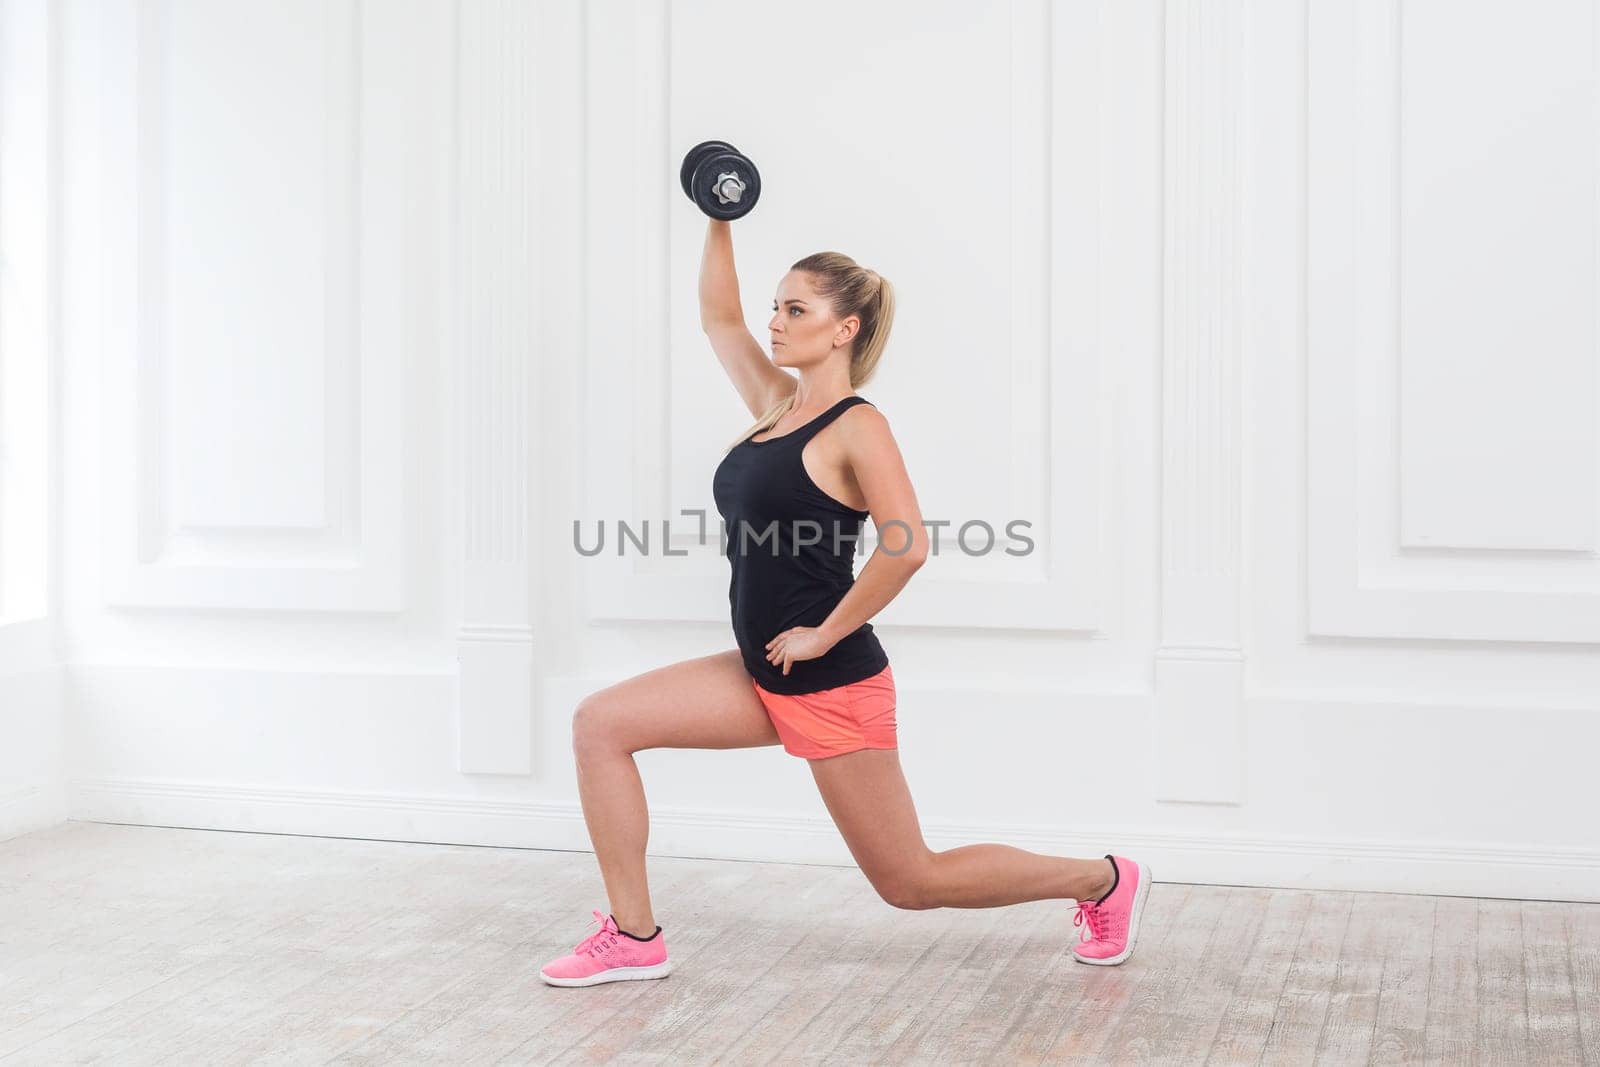 Side view portrait of young athletic beautiful blonde woman wearing pink shorts and black top holding dumbbell, doing exercise for arms at the gym on white wall. Indoor studio shot.